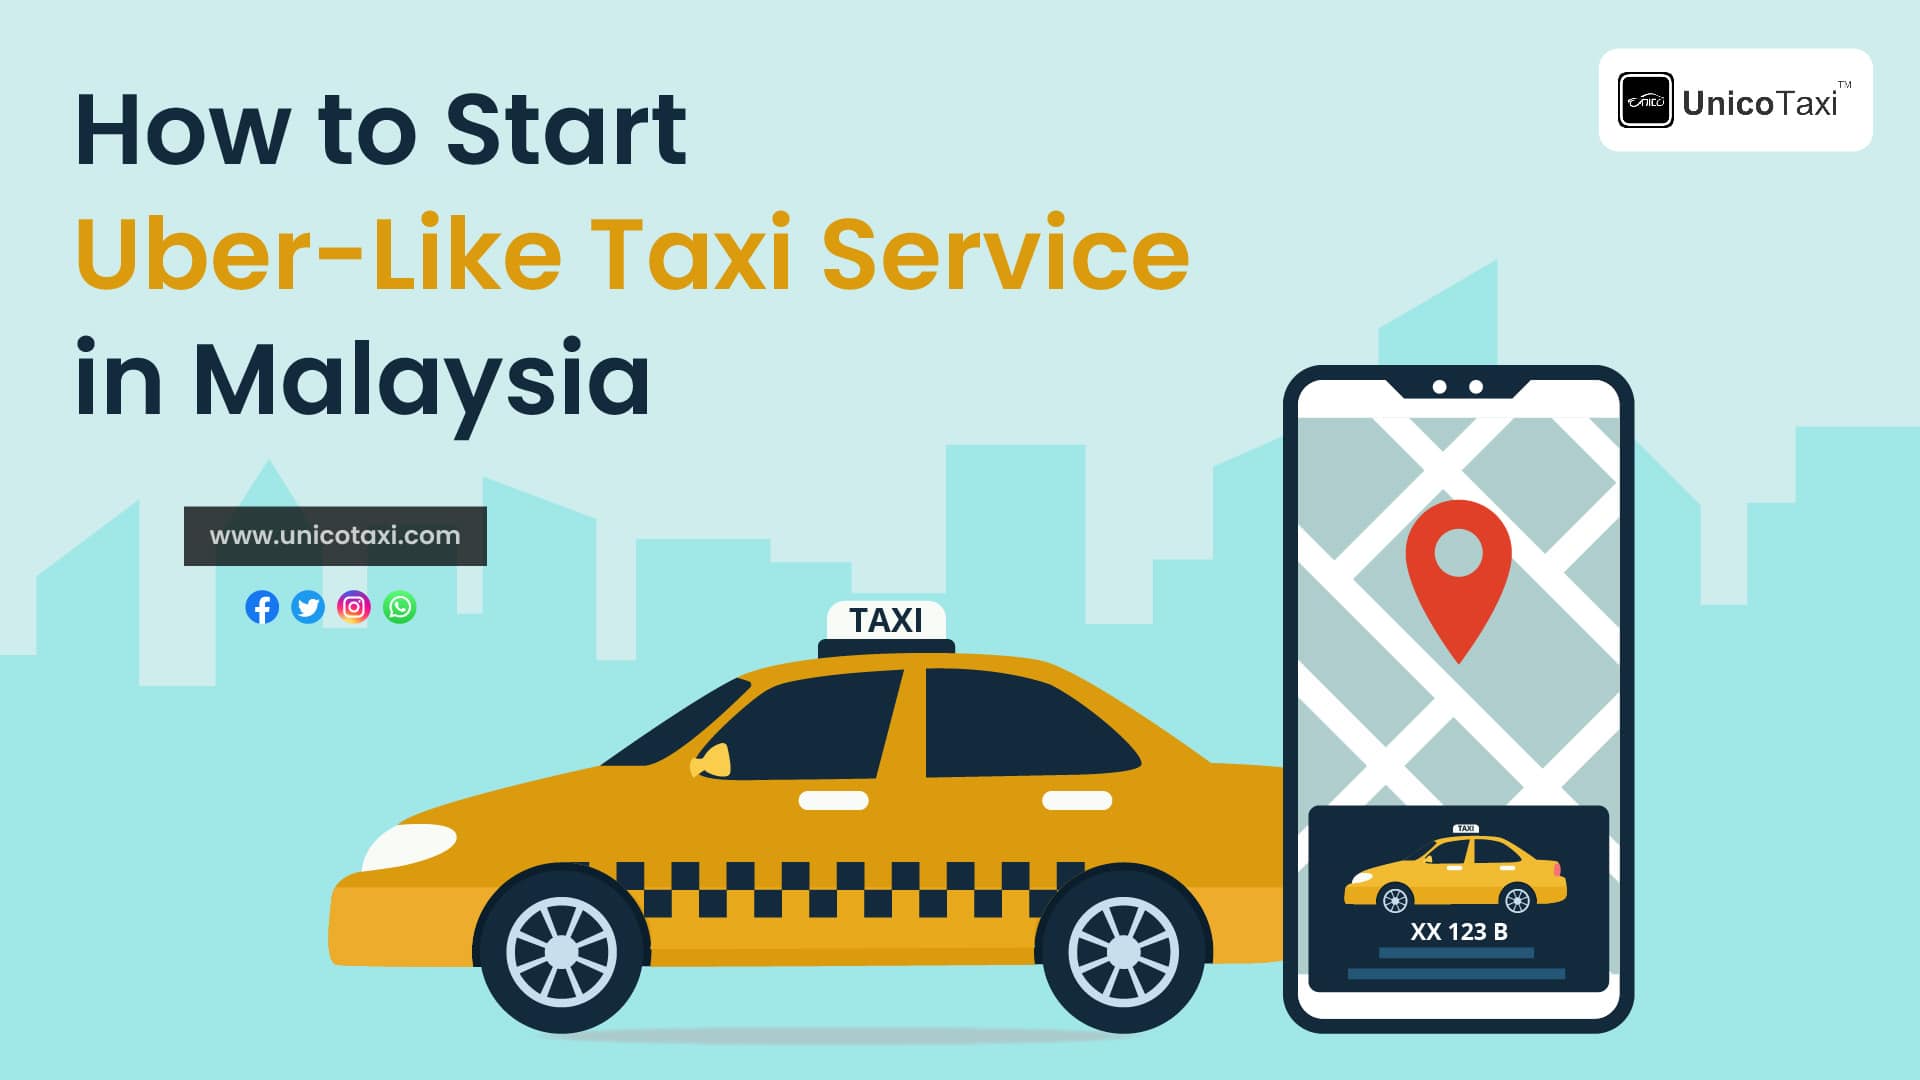 How to Start Uber-Like Taxi Service Business in Malaysia?